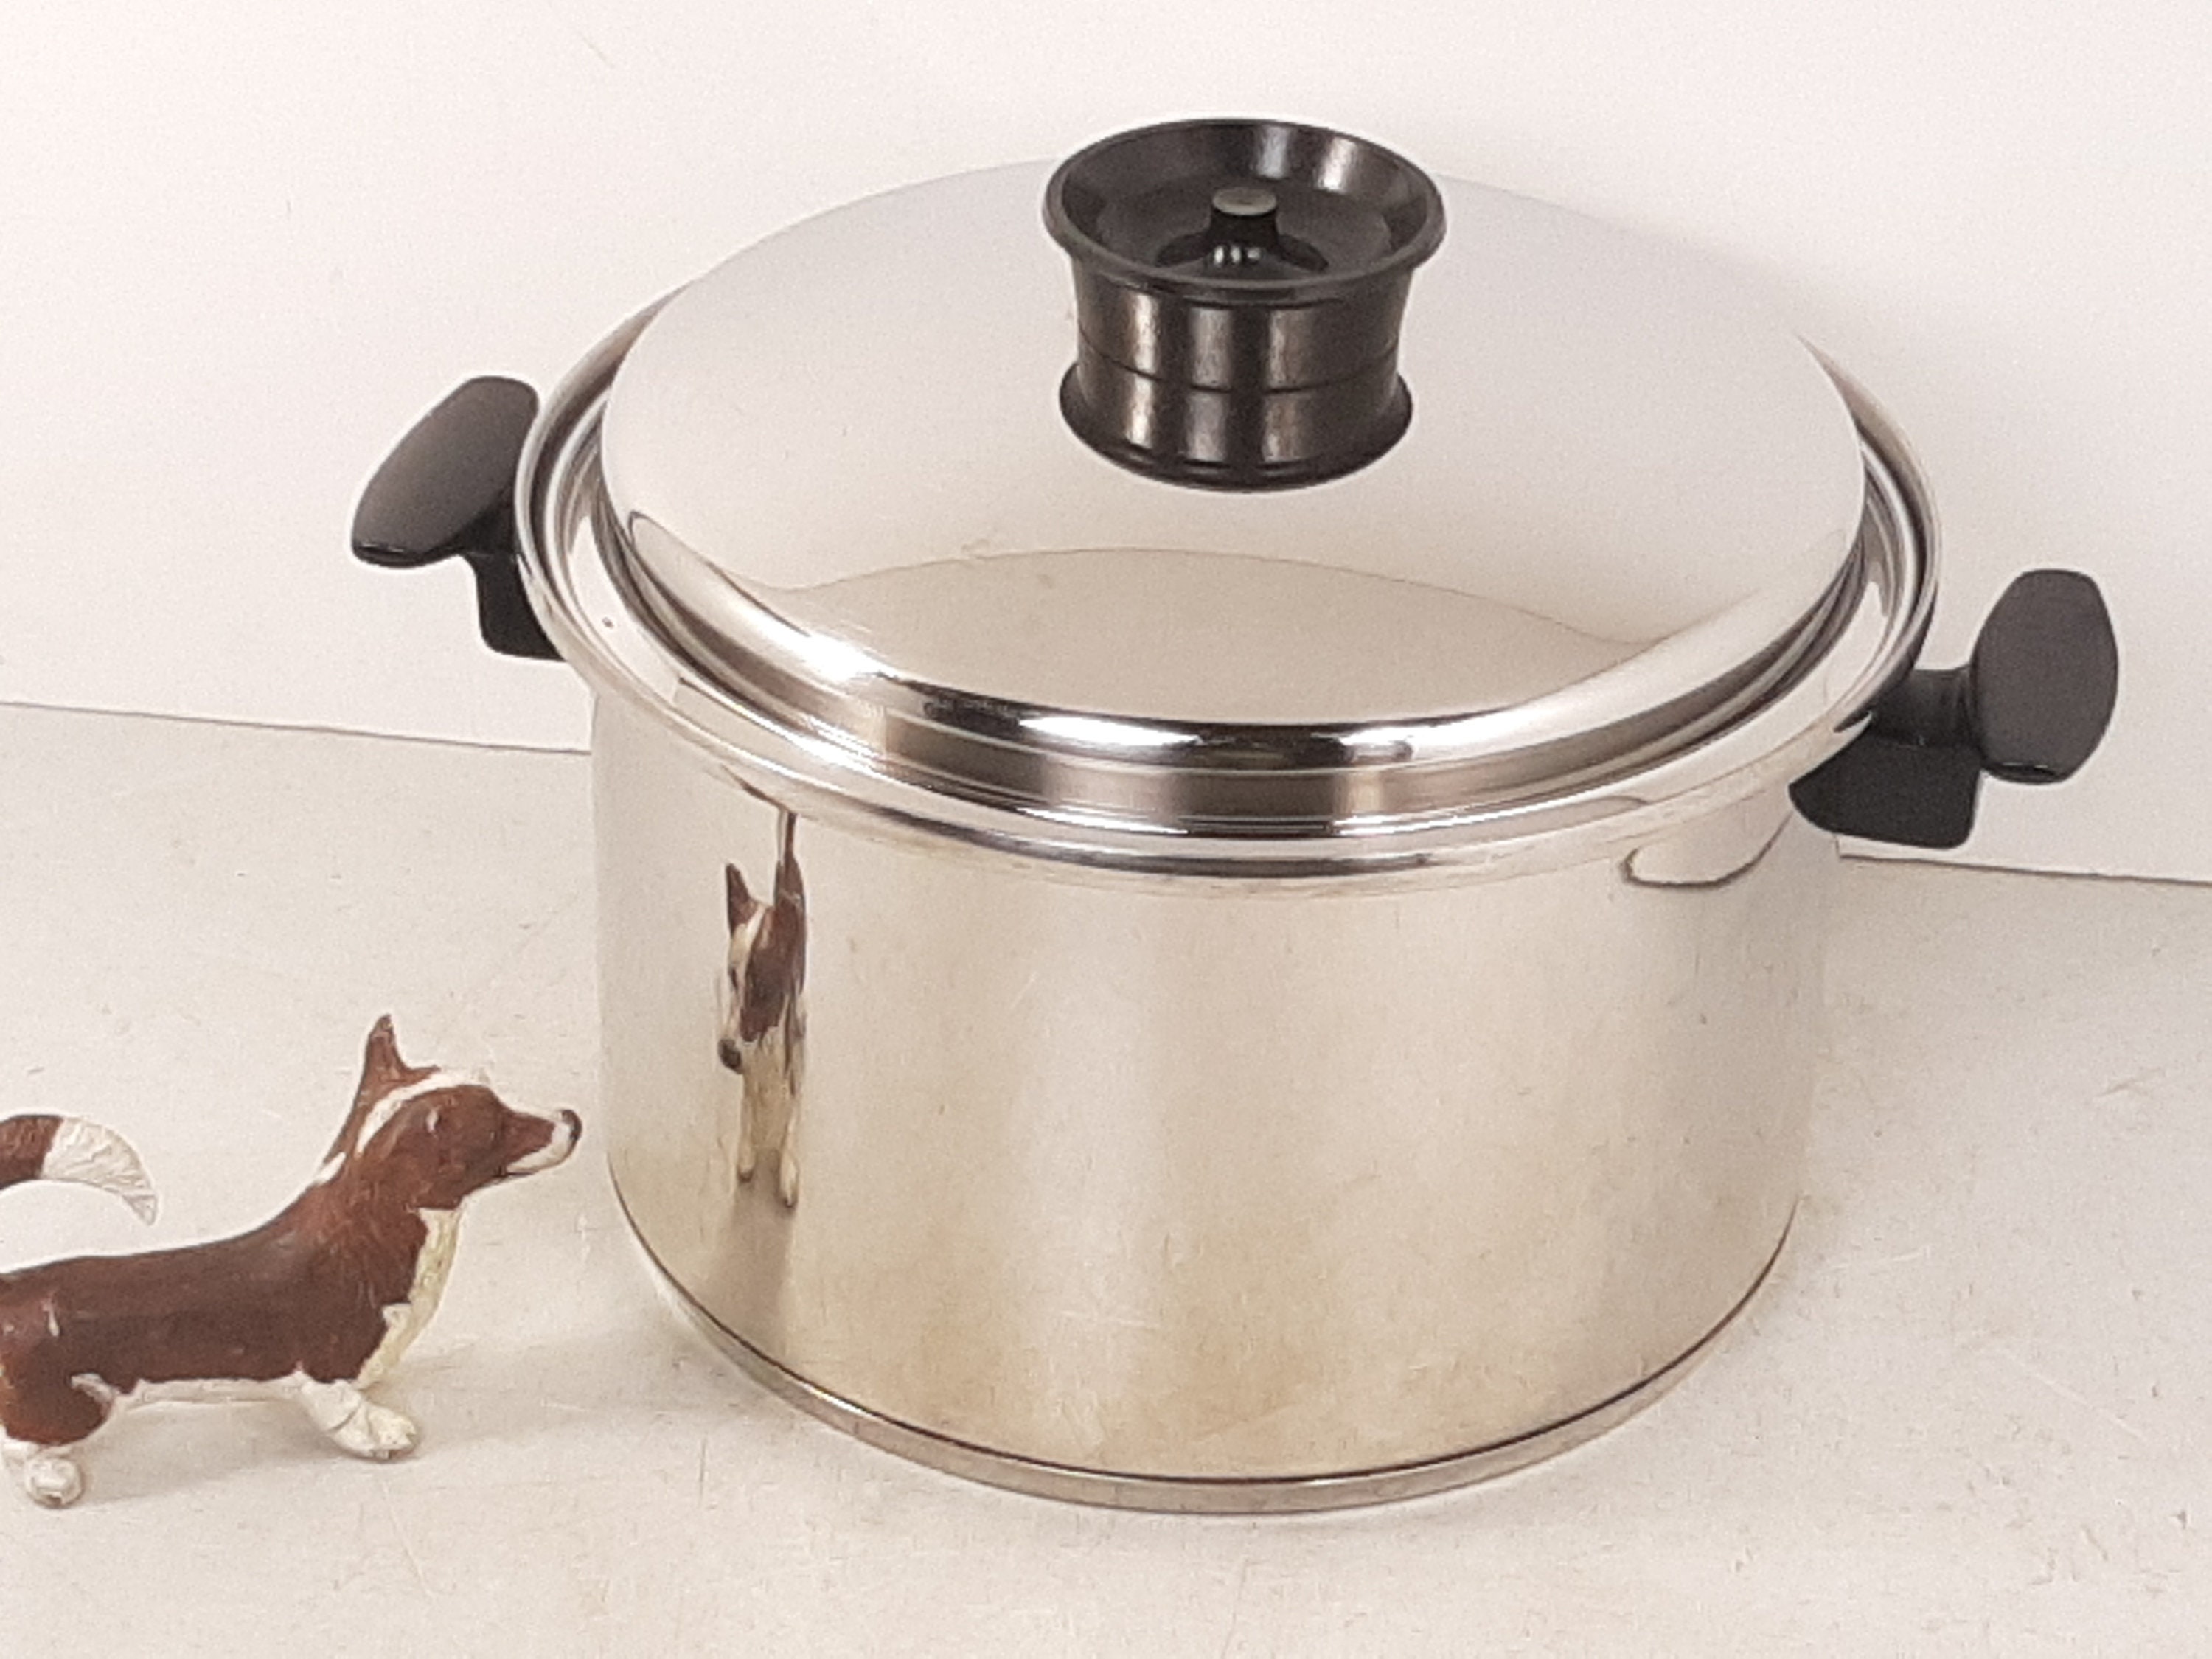 Chefs Ware by Townecraft 1 1/2 Quart Saucepan with Lid Stainless